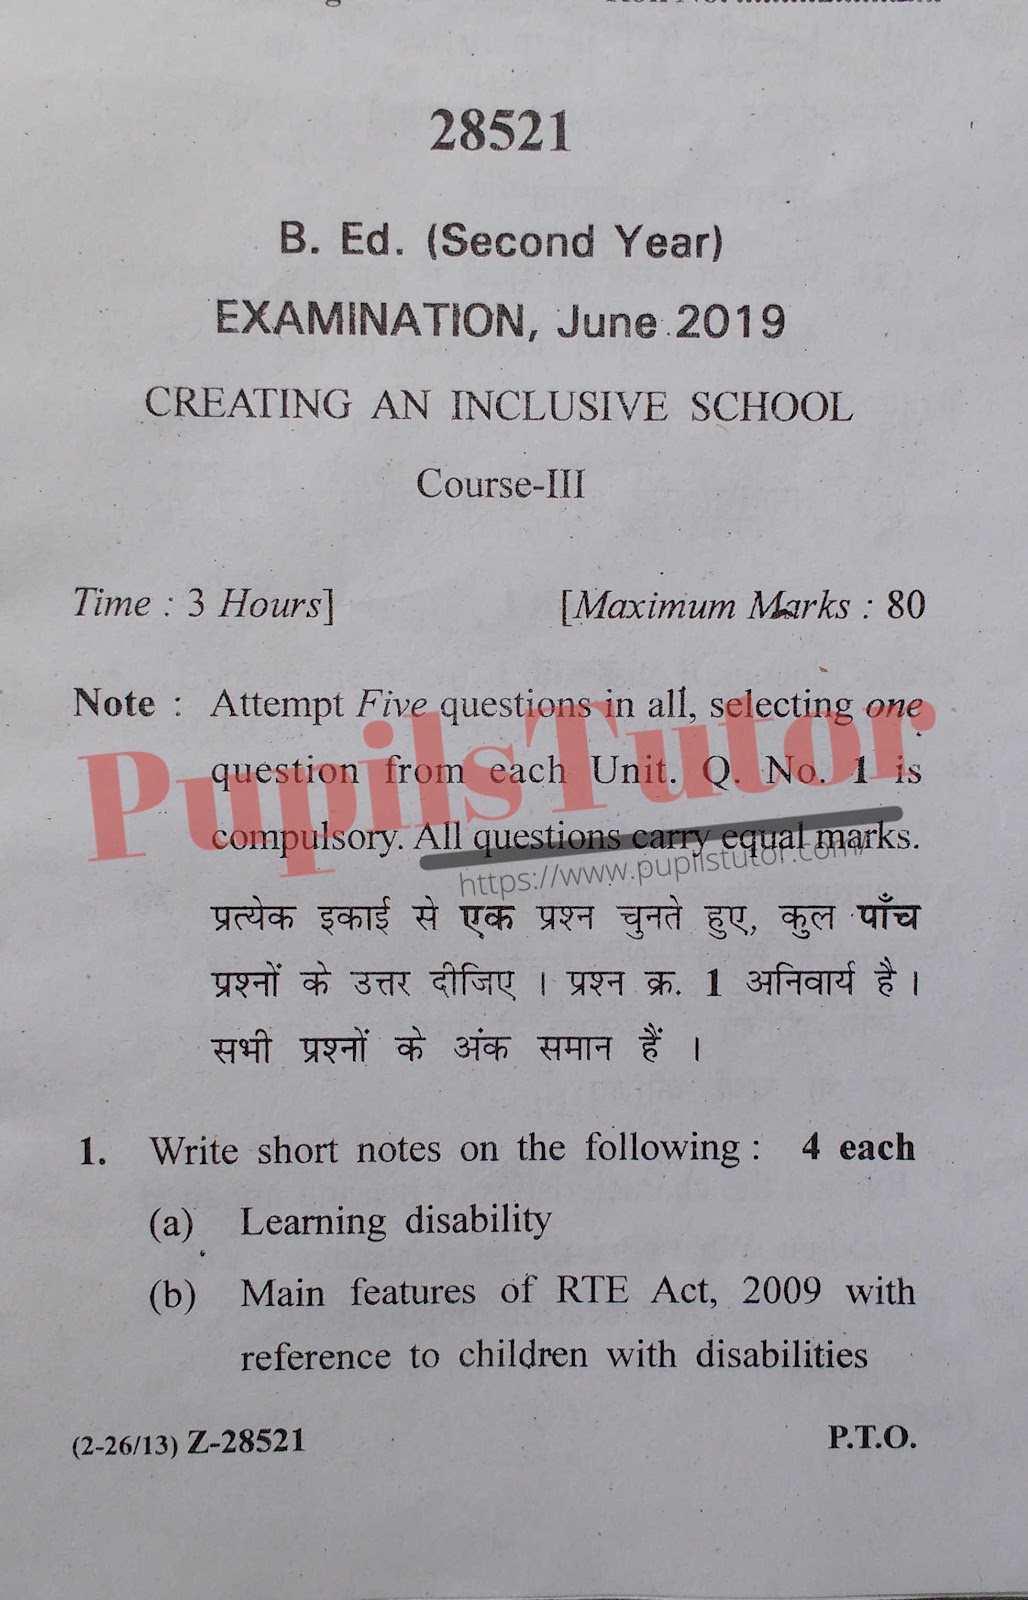 MDU (Maharshi Dayanand University, Rohtak Haryana) BEd Regular Exam Second Year Previous Year Creating An Inclusive School Question Paper For June, 2019 Exam (Question Paper Page 1) - pupilstutor.com